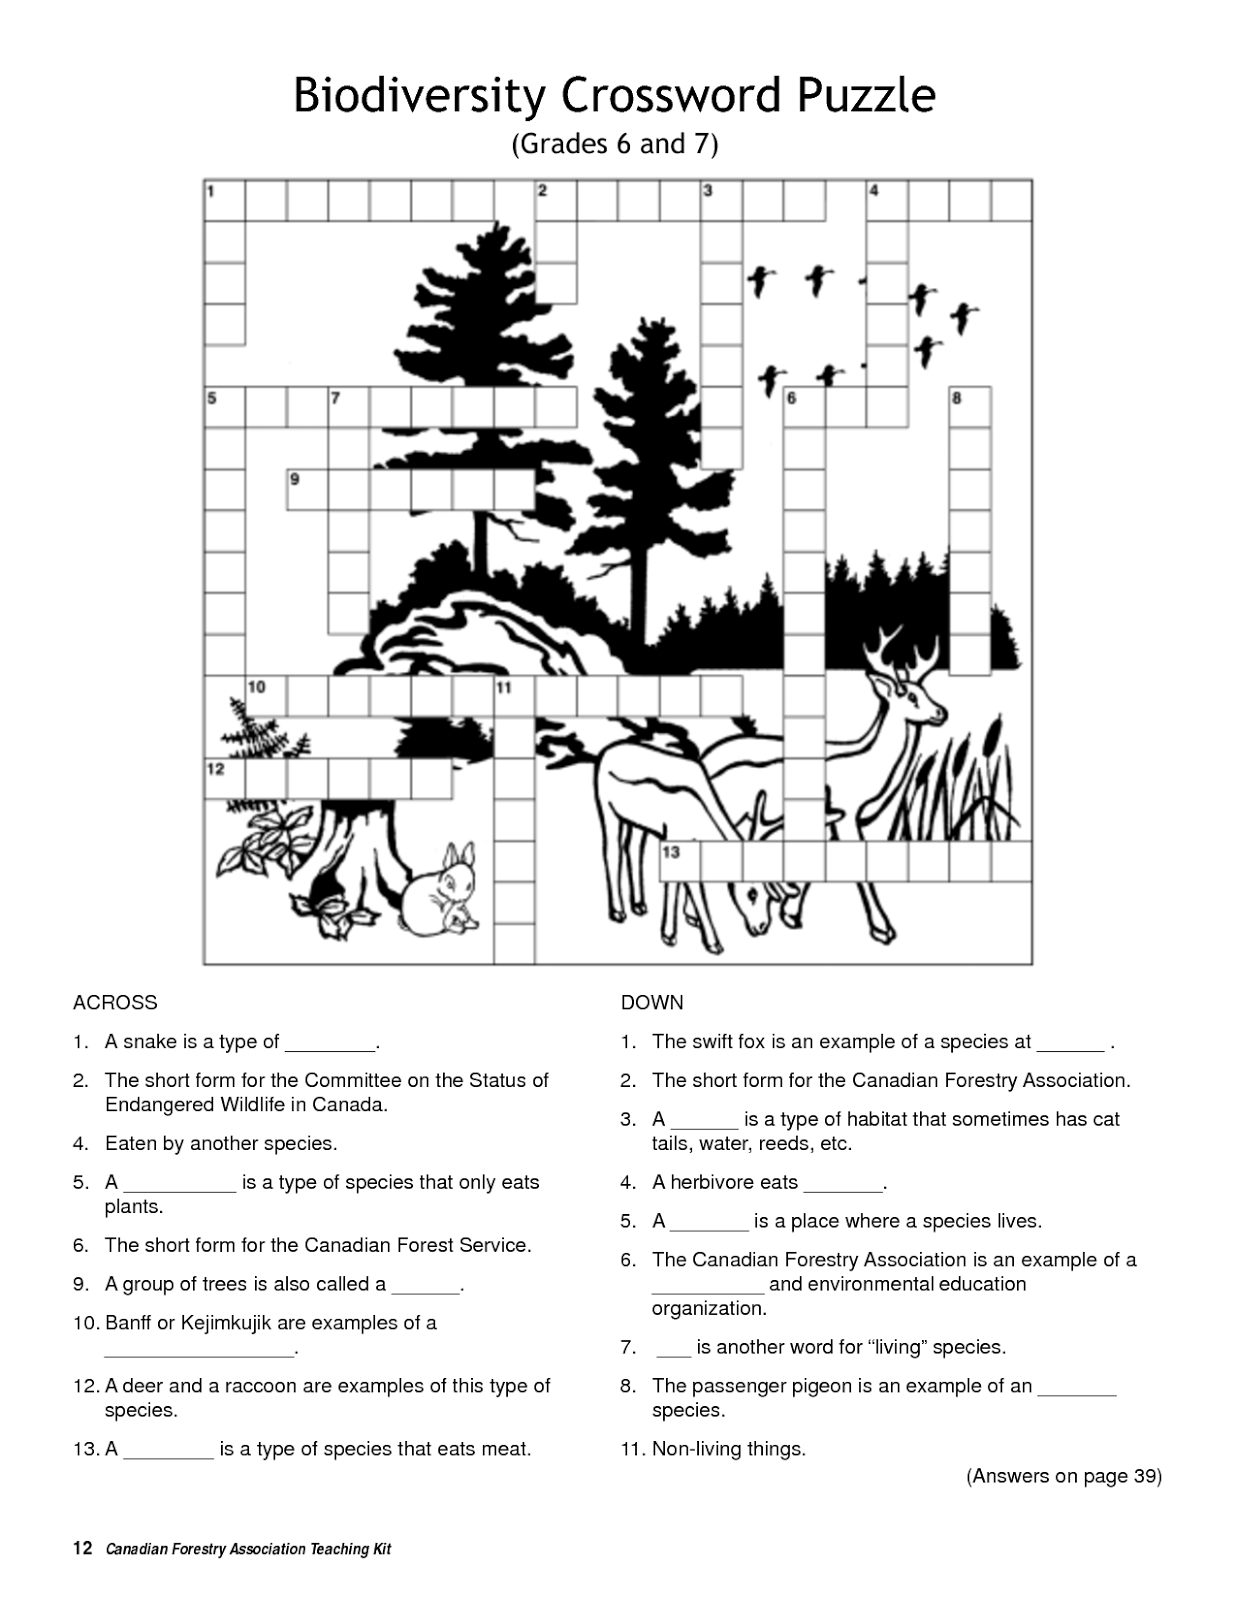 earth-day-crossword-puzzle-printable